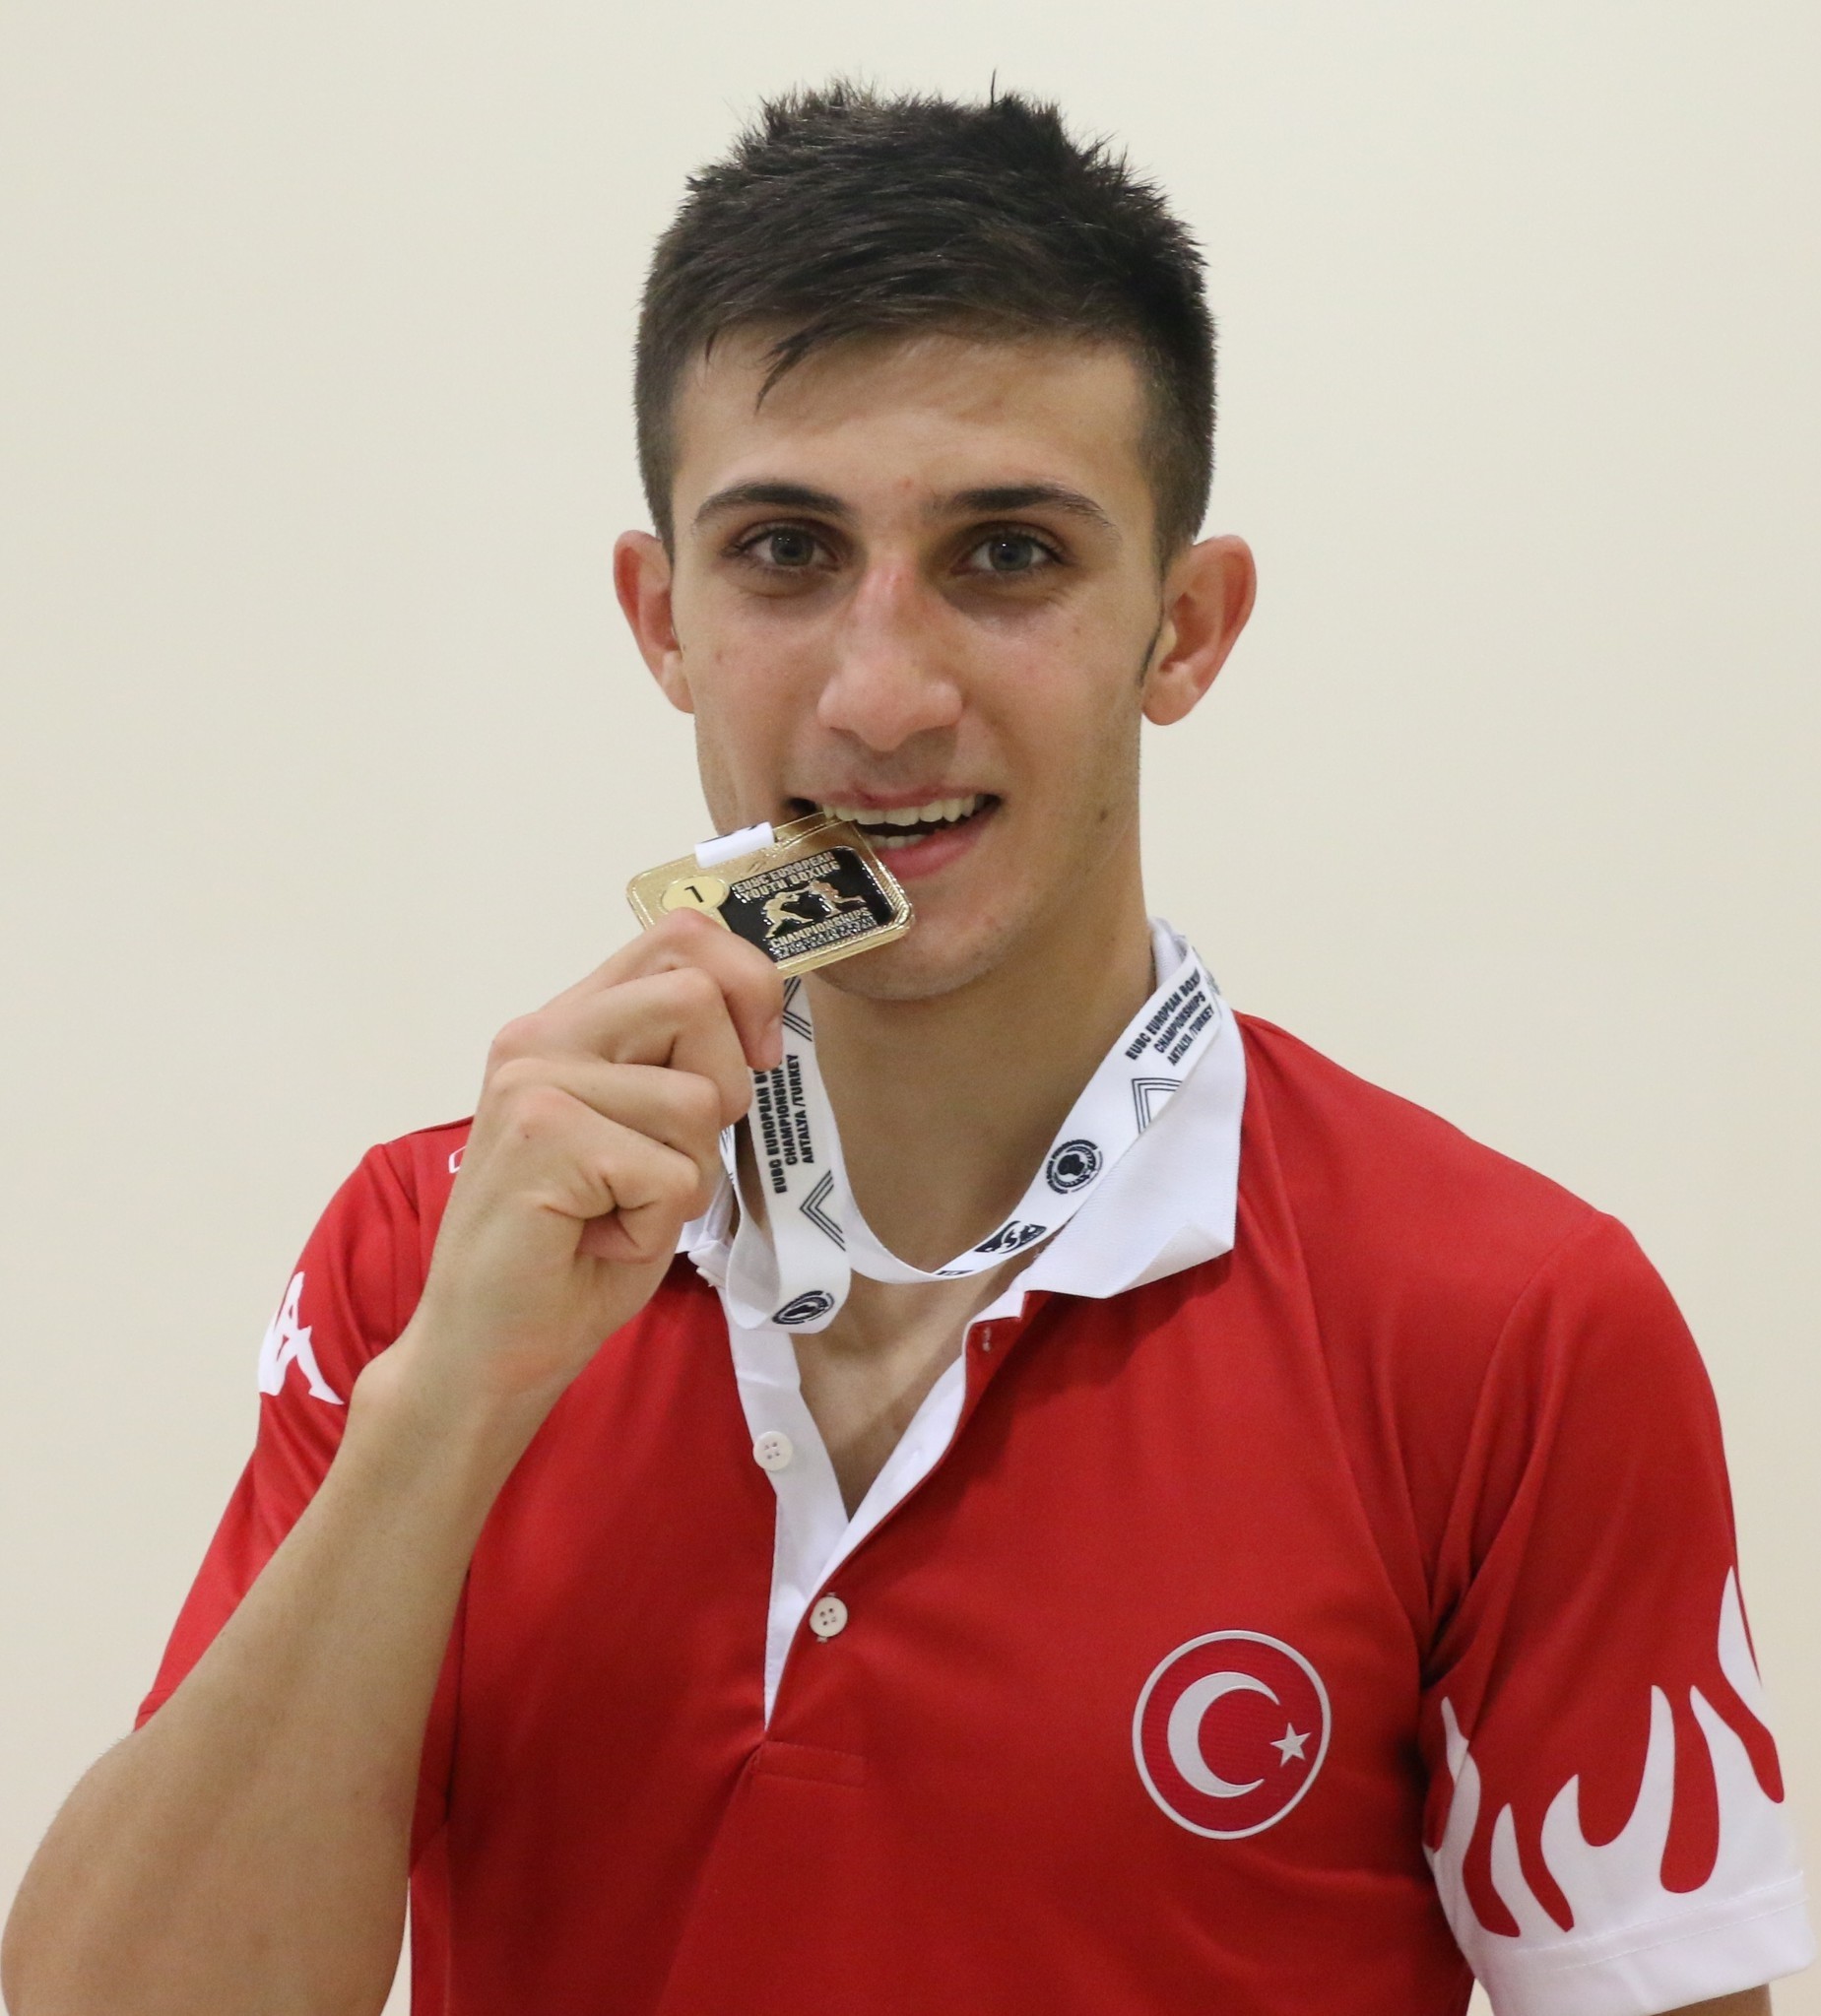 The 18-year-old boxer Tuu011frulhan Erdemir is unbeaten this year.